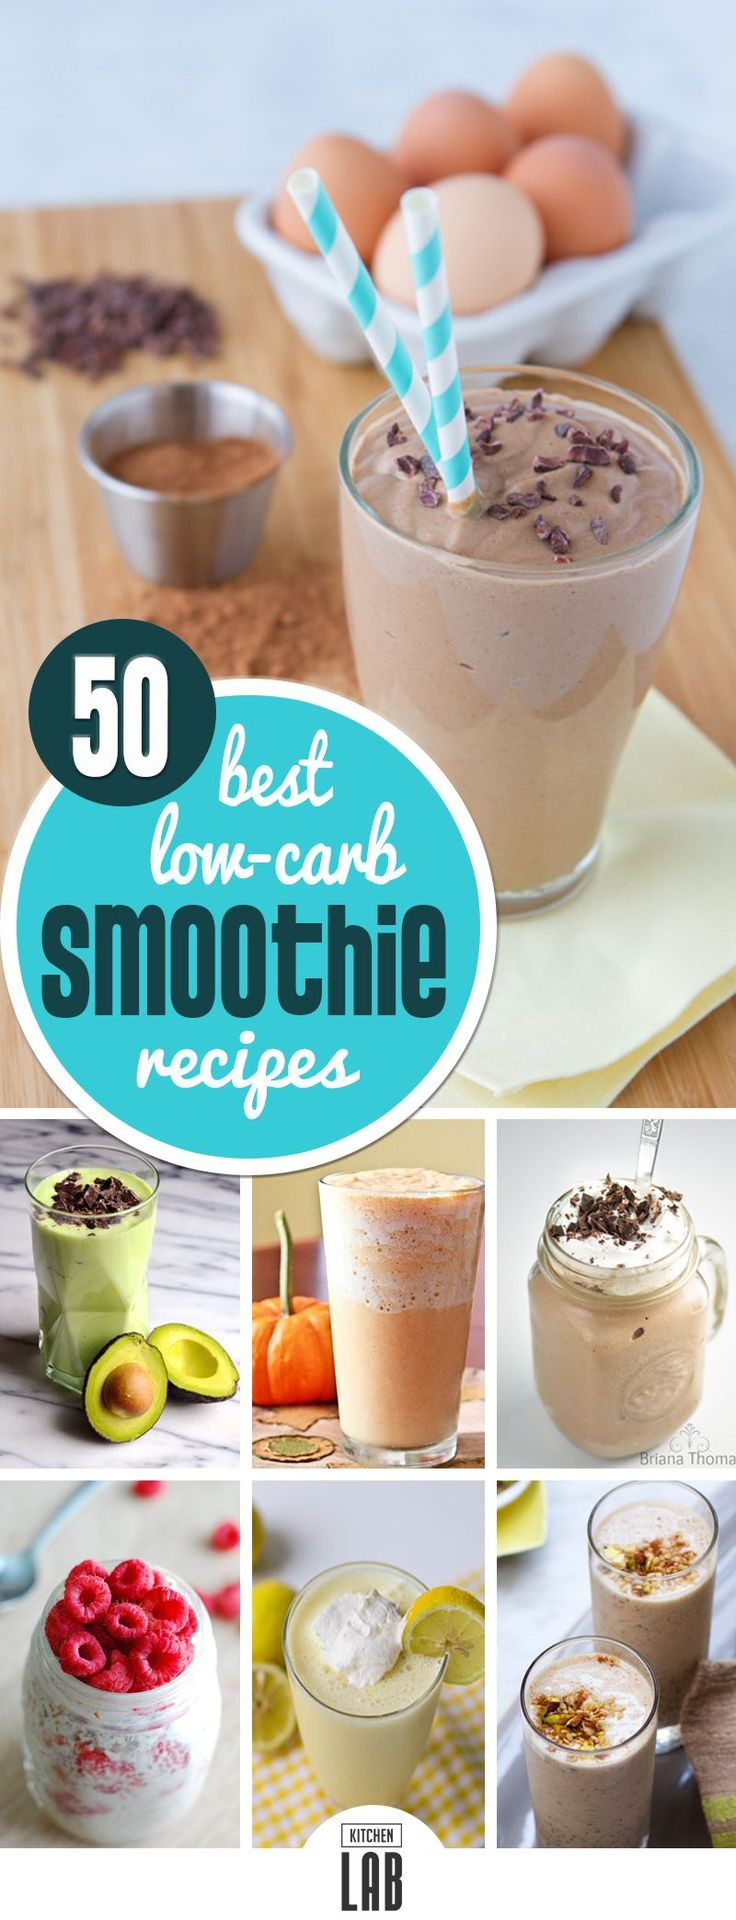 Low Carb Juicing Recipes For Weight Loss
 Best 25 Diabetic smoothie recipes ideas on Pinterest